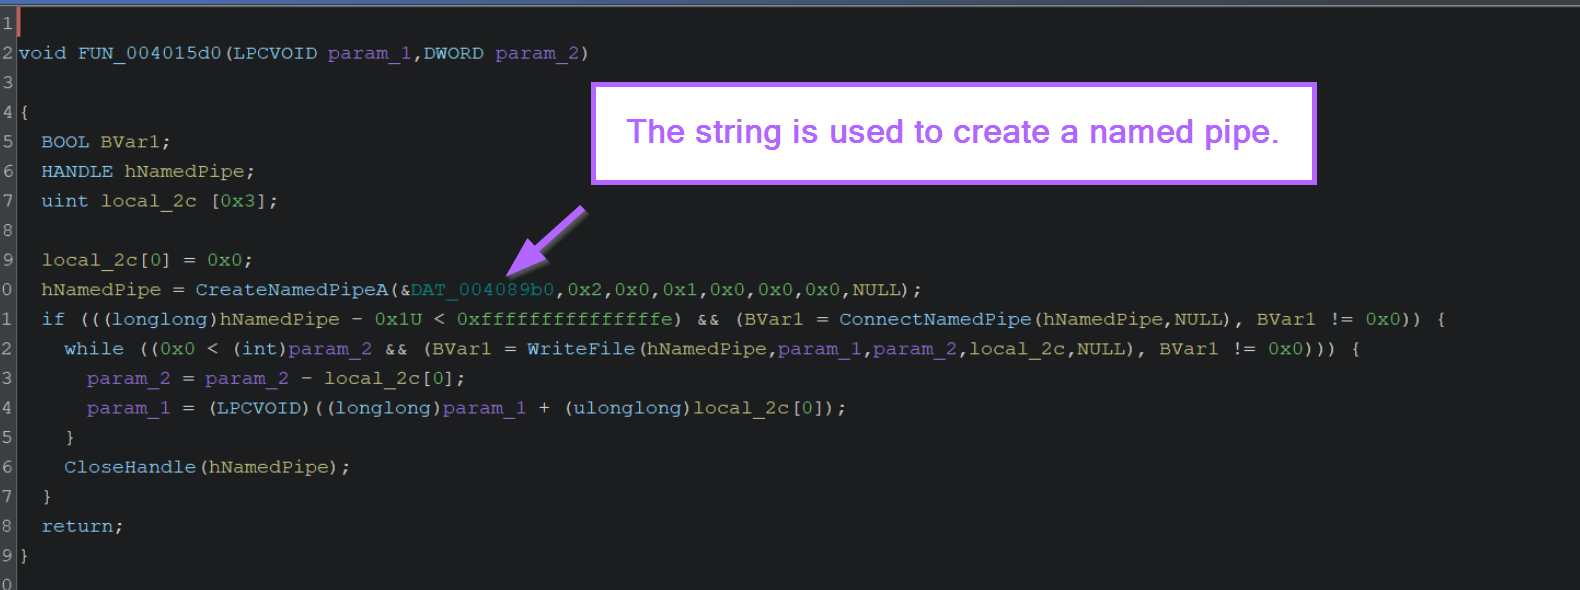 Ghidra Basics - Pivoting from String Cross References